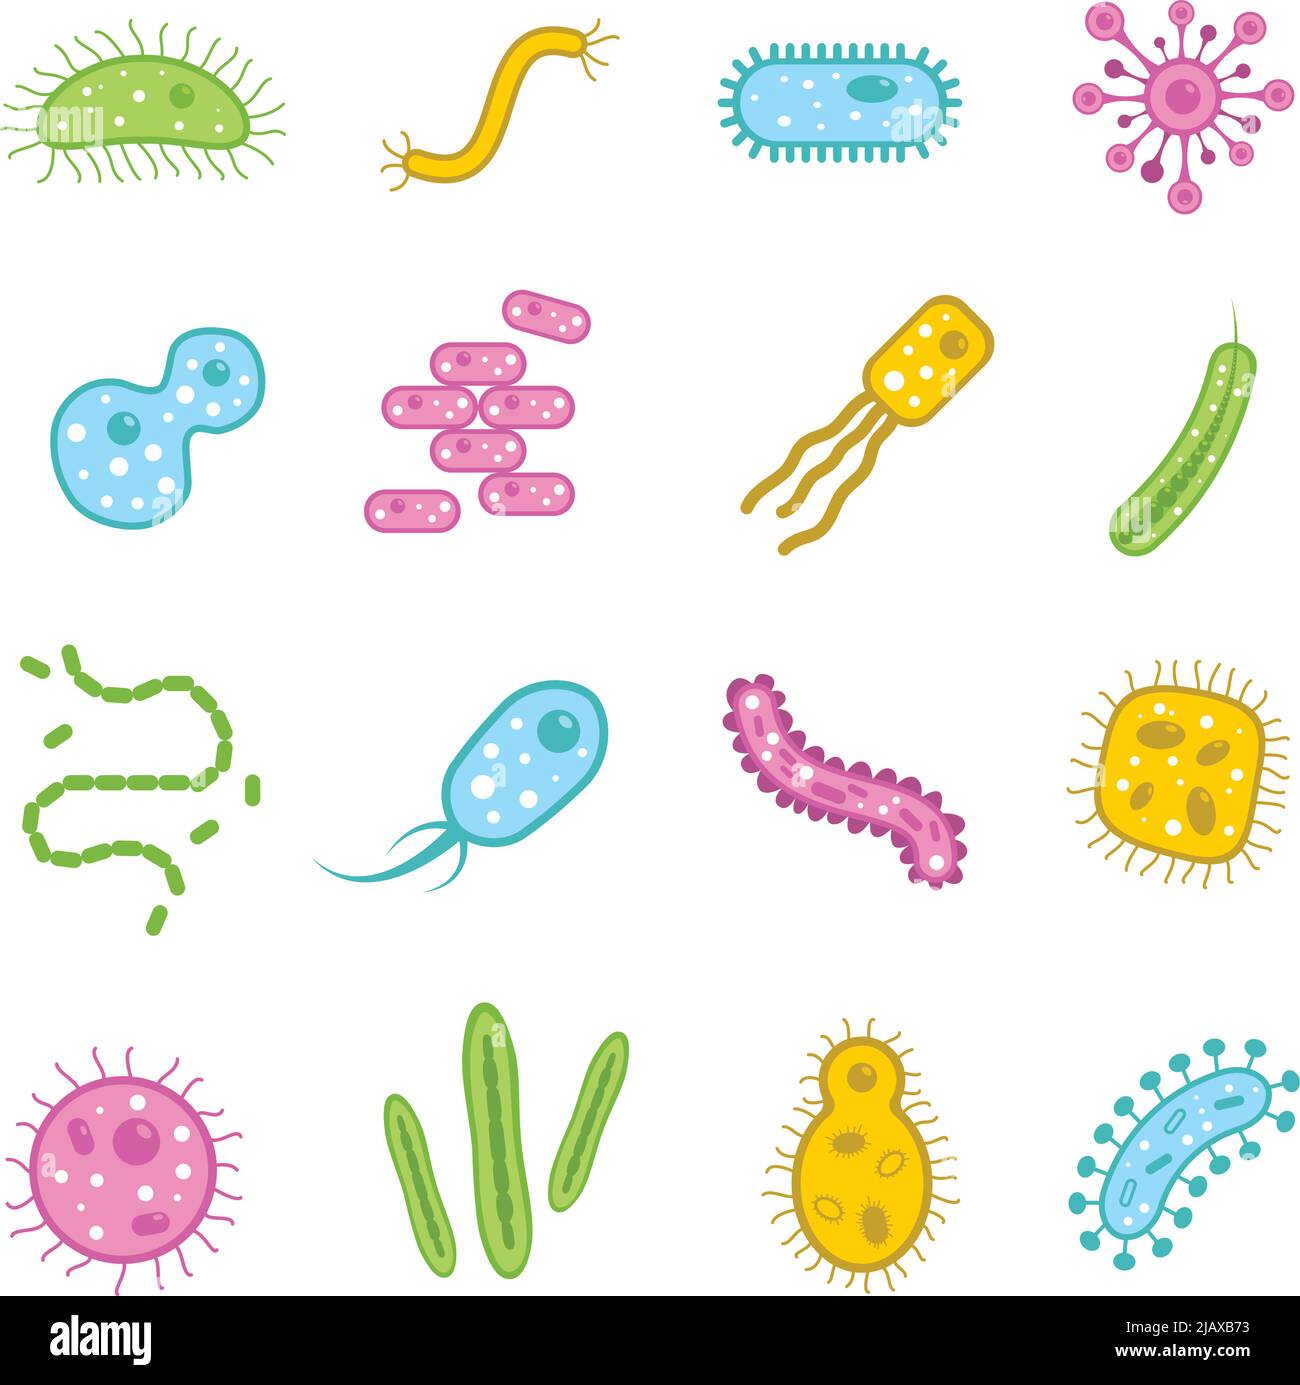 Bacteria and verus microscopic organisms flat icons set isolated vector illustration Stock Vector